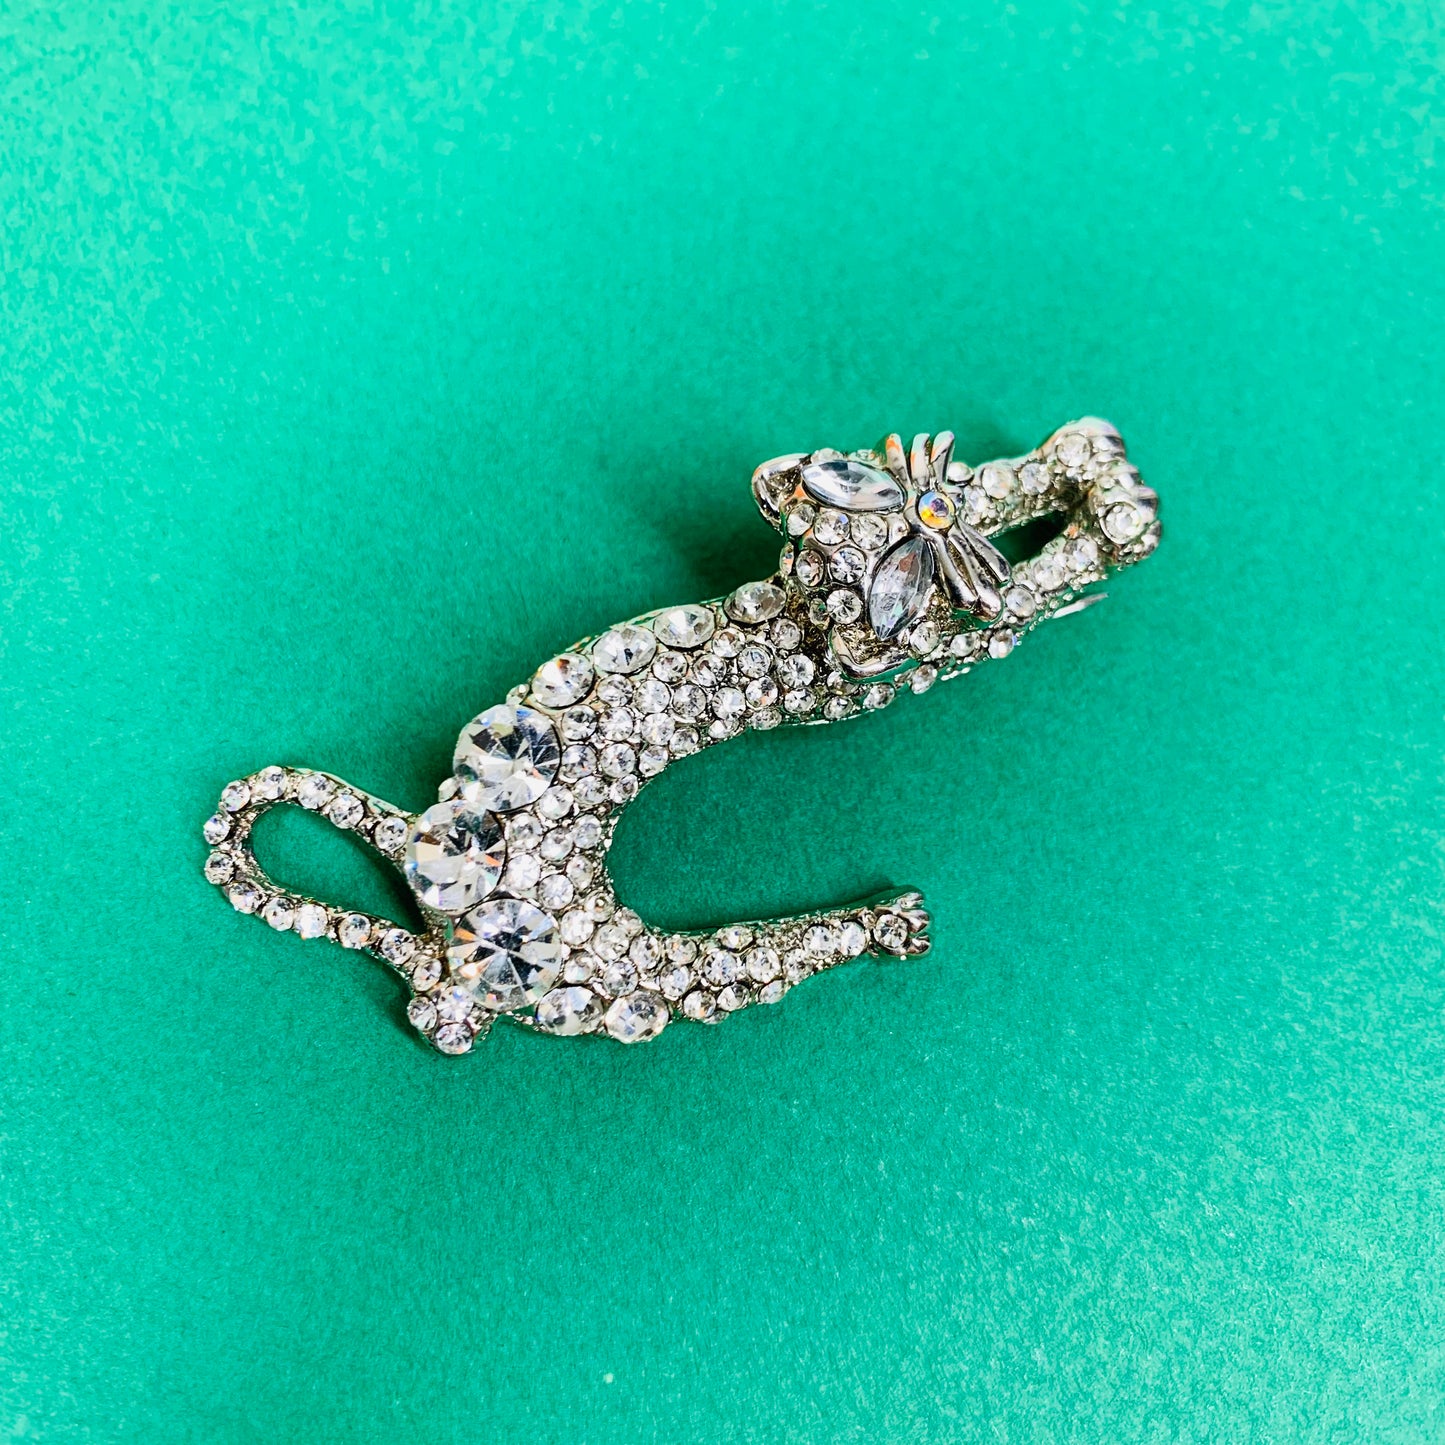 Rare l 1950s costume cat brooch with clear rhinestones